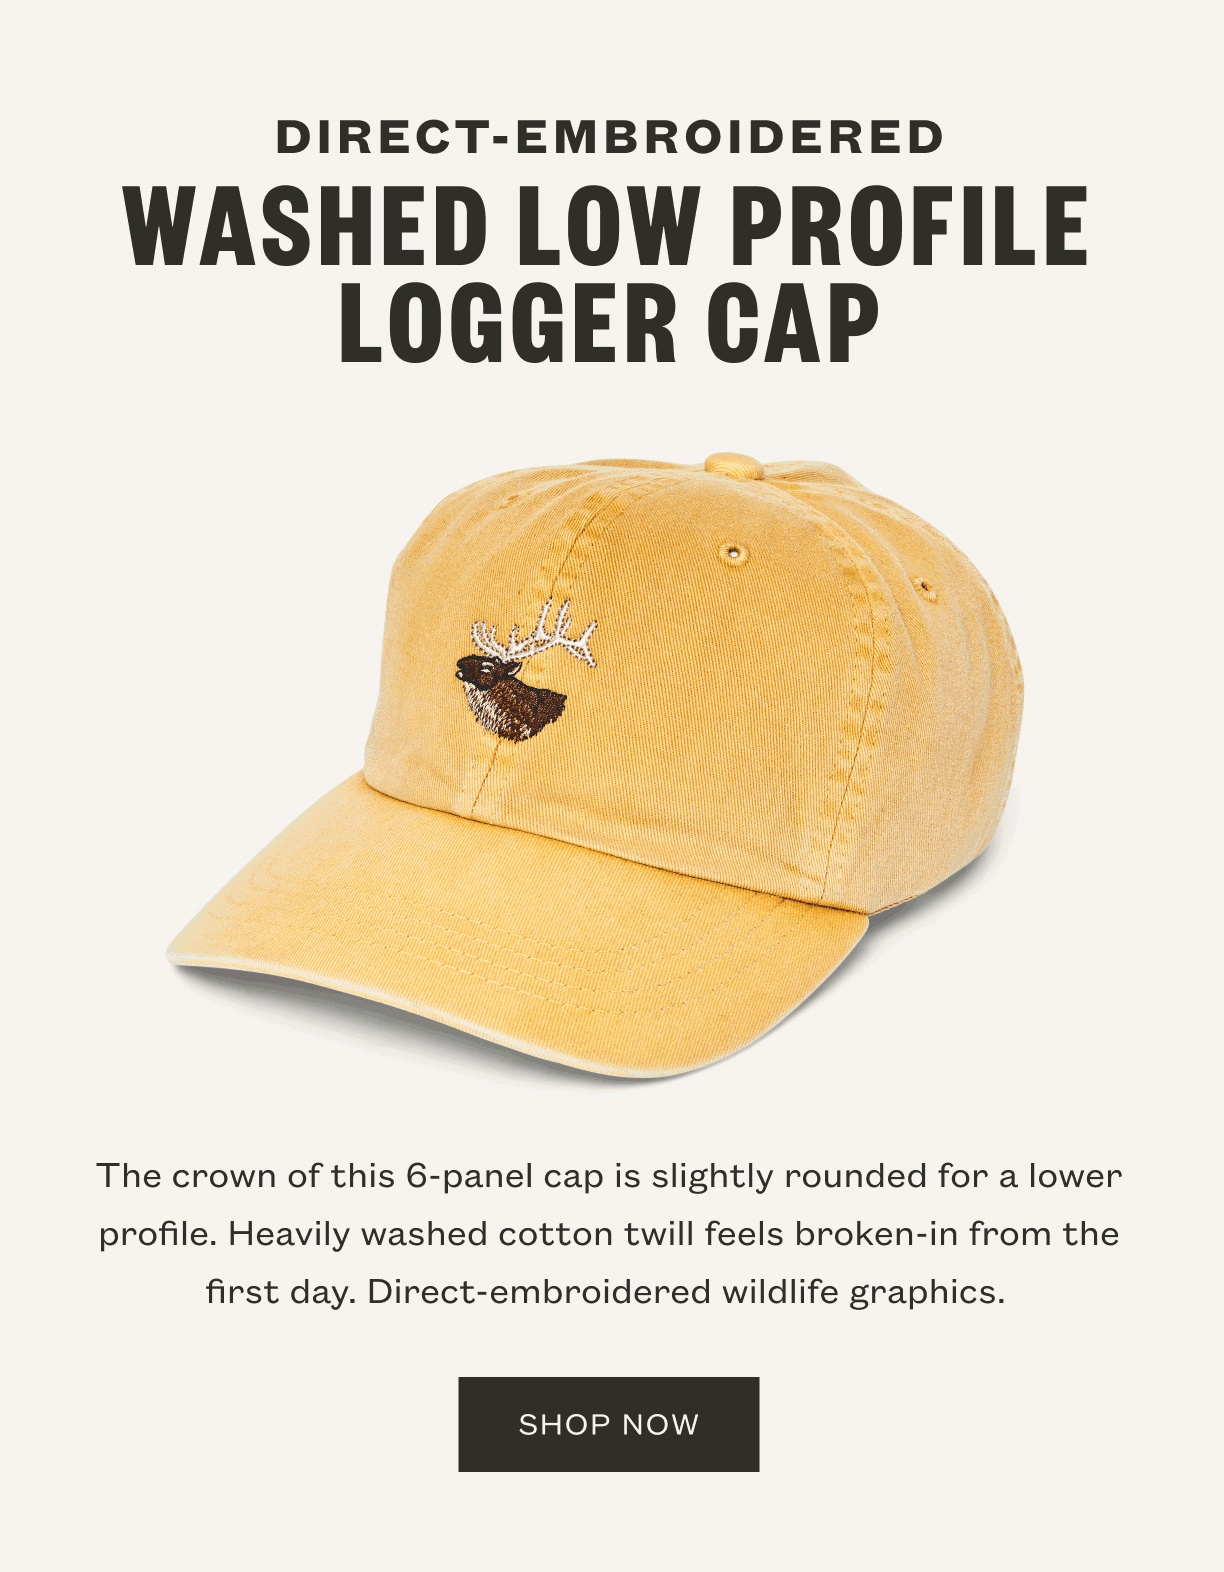 Washed Low Profile Logger Cap